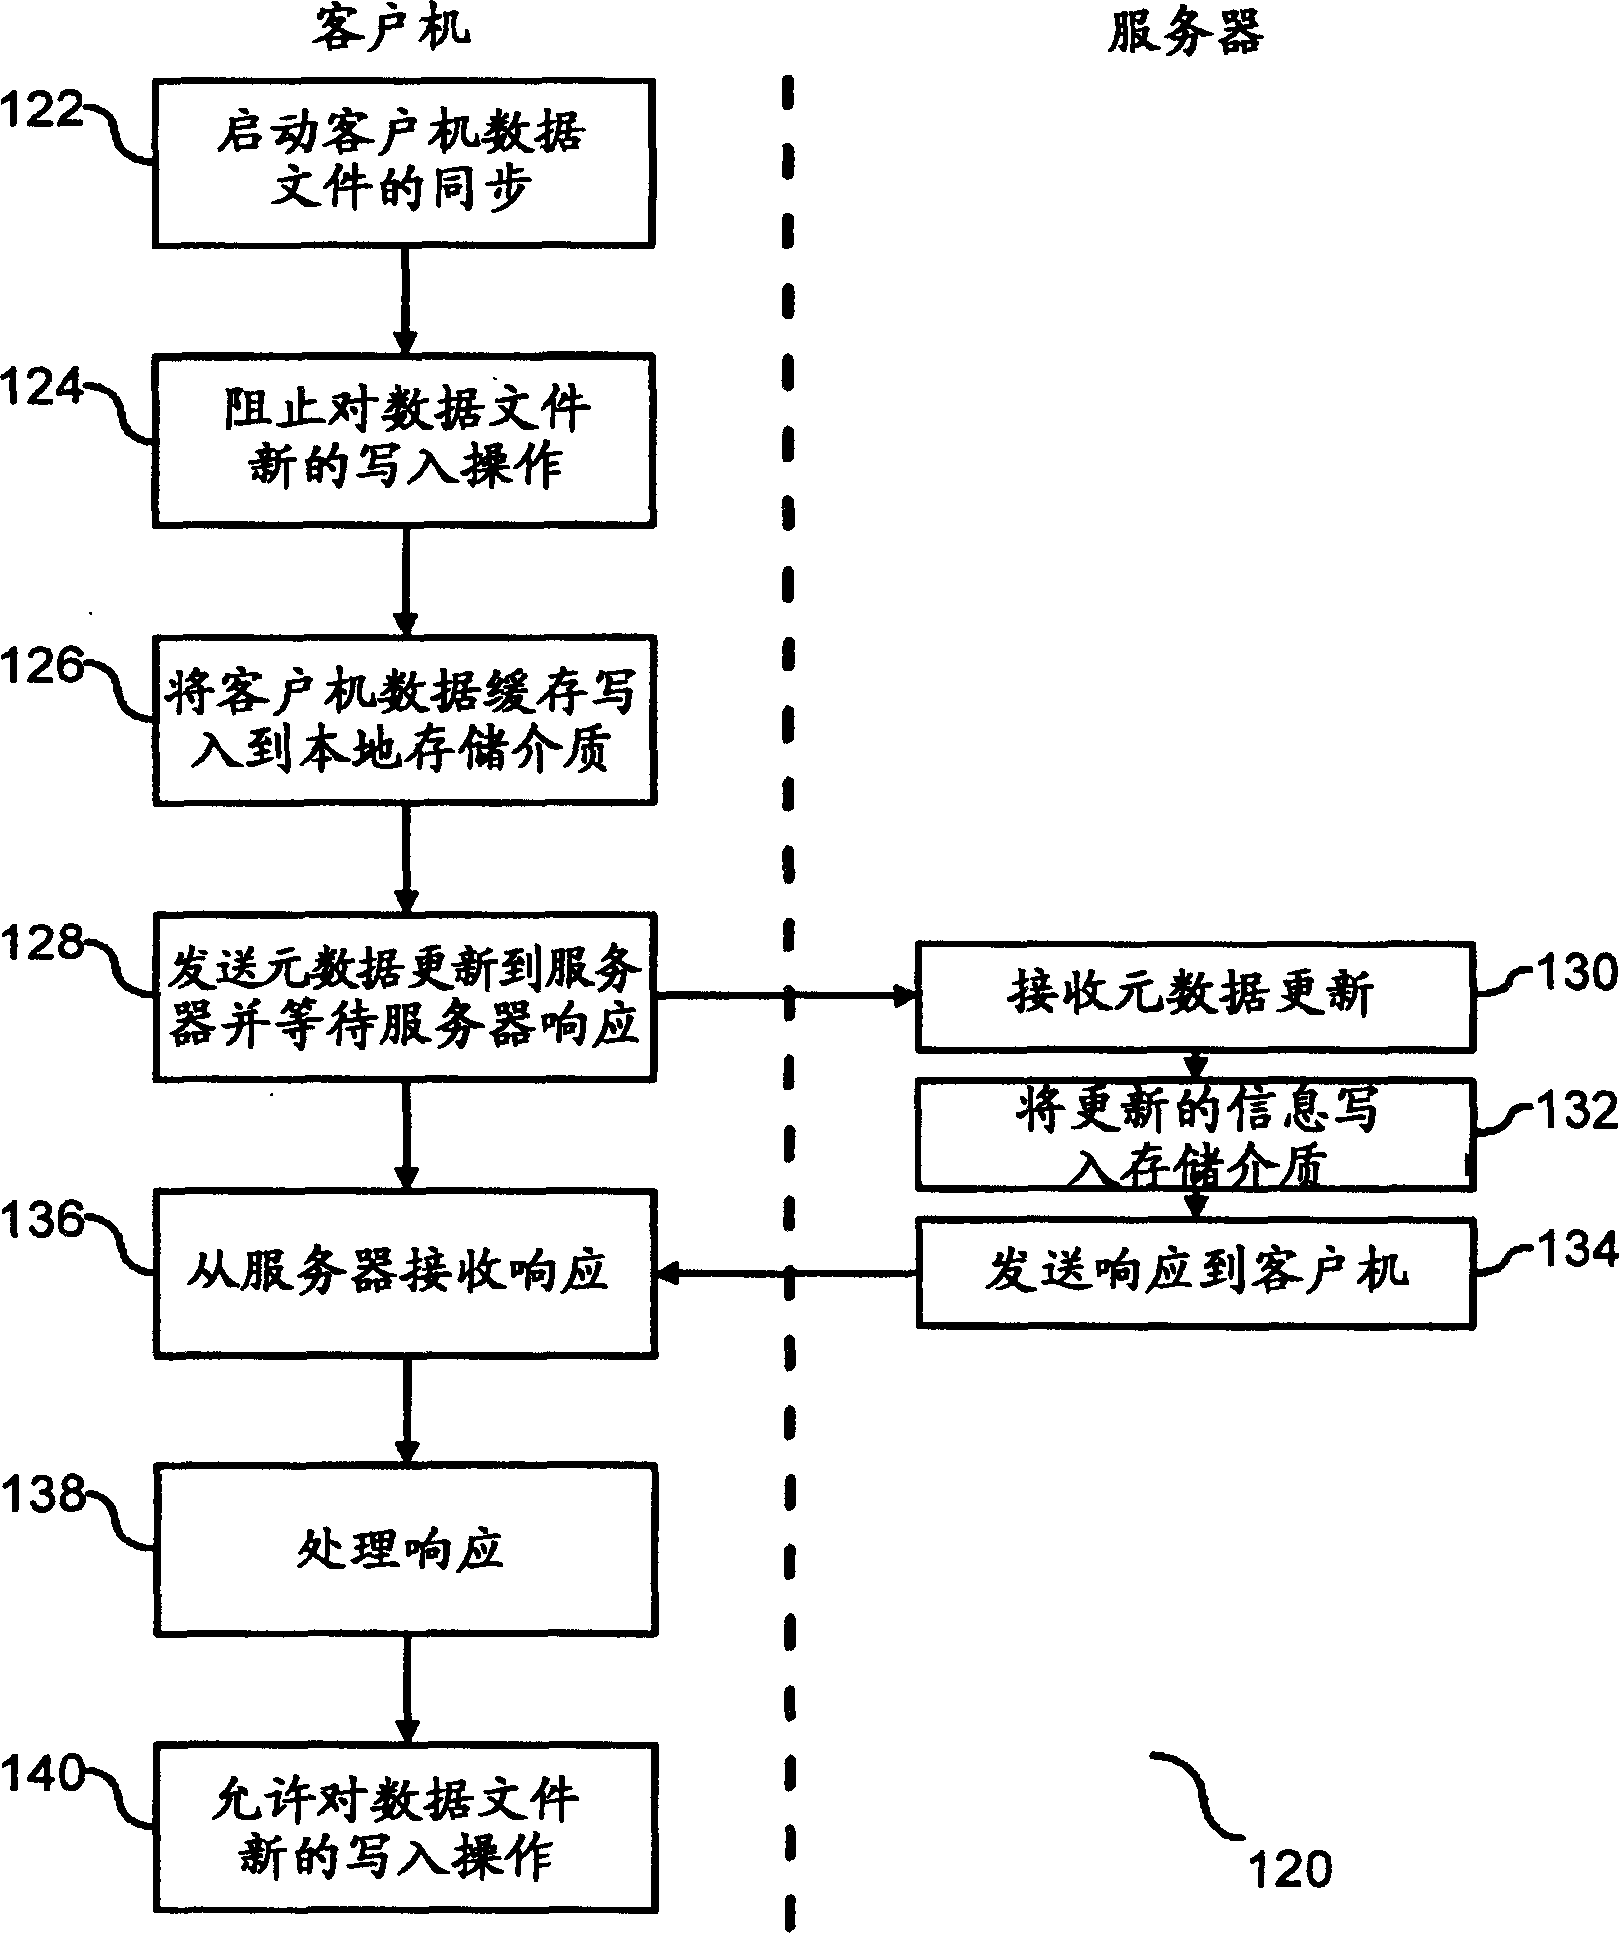 Method and system for implenmenting buffer store uniformaty